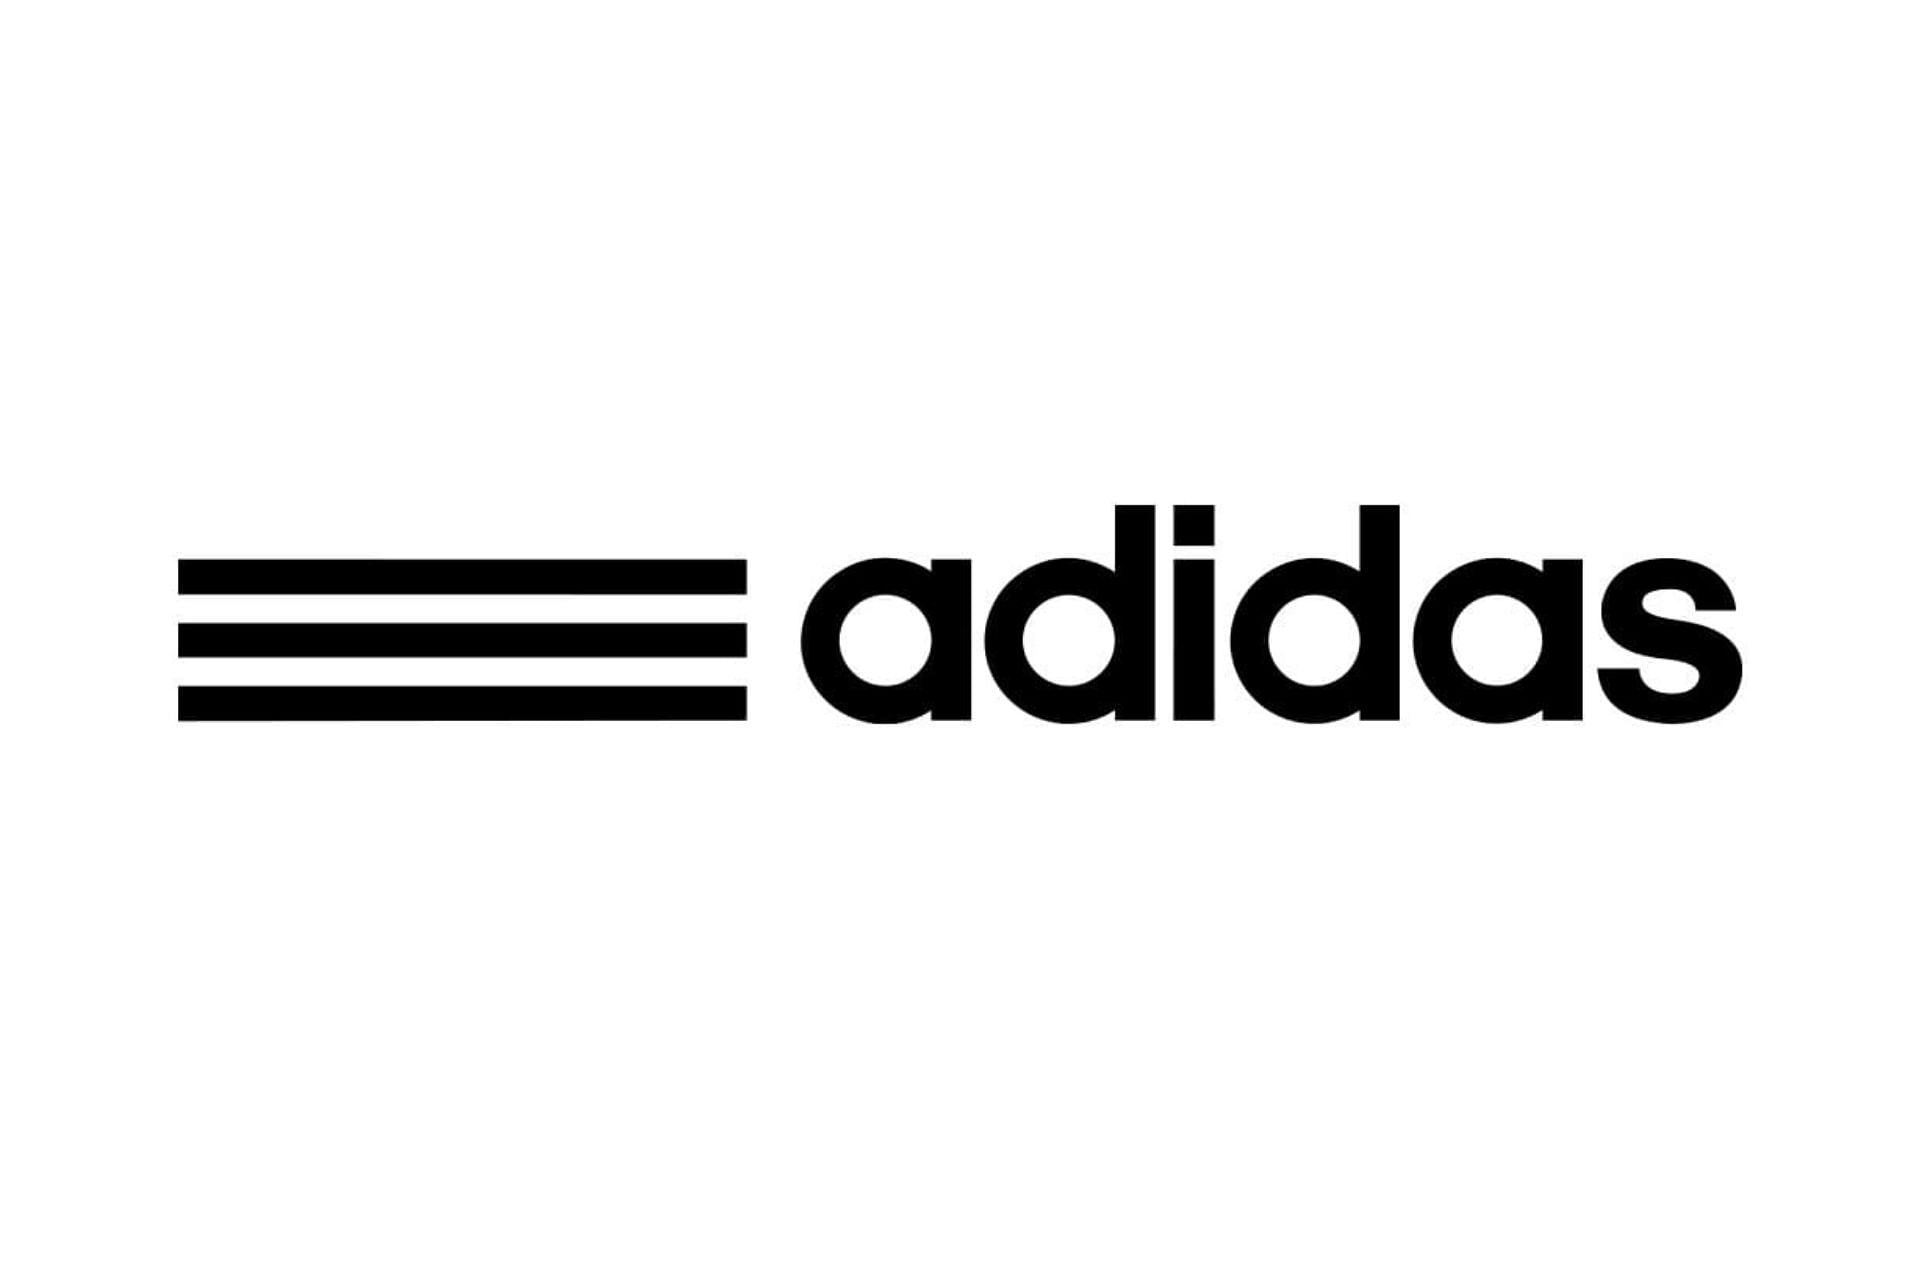 Take a look at the parallel line logo (Image via Adidas)